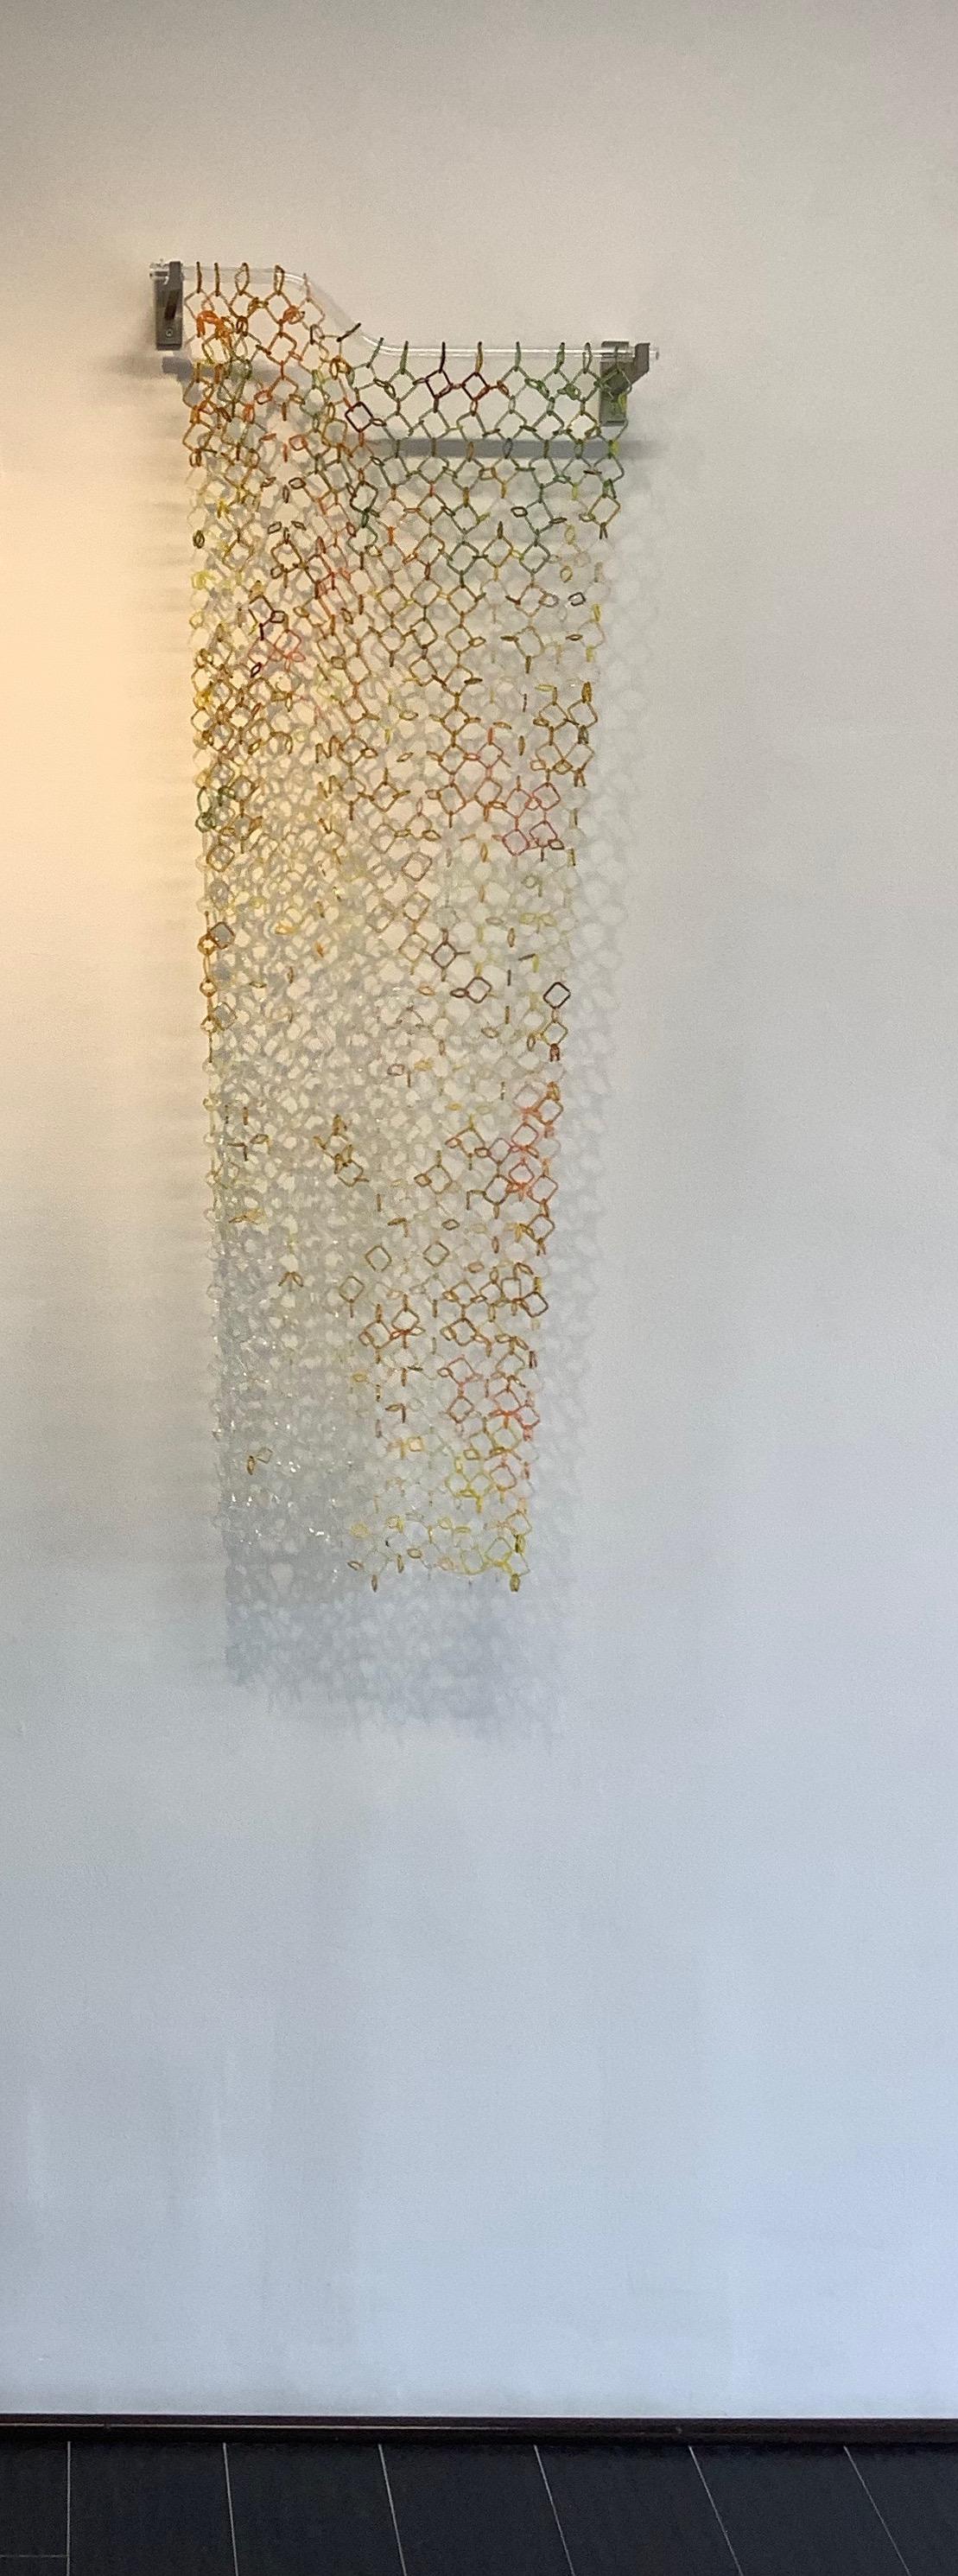 Lichen Two, Long Hanging Sculpture, Torch-Worked Glass, Chain Maille Links - Brown Abstract Sculpture by David Licata